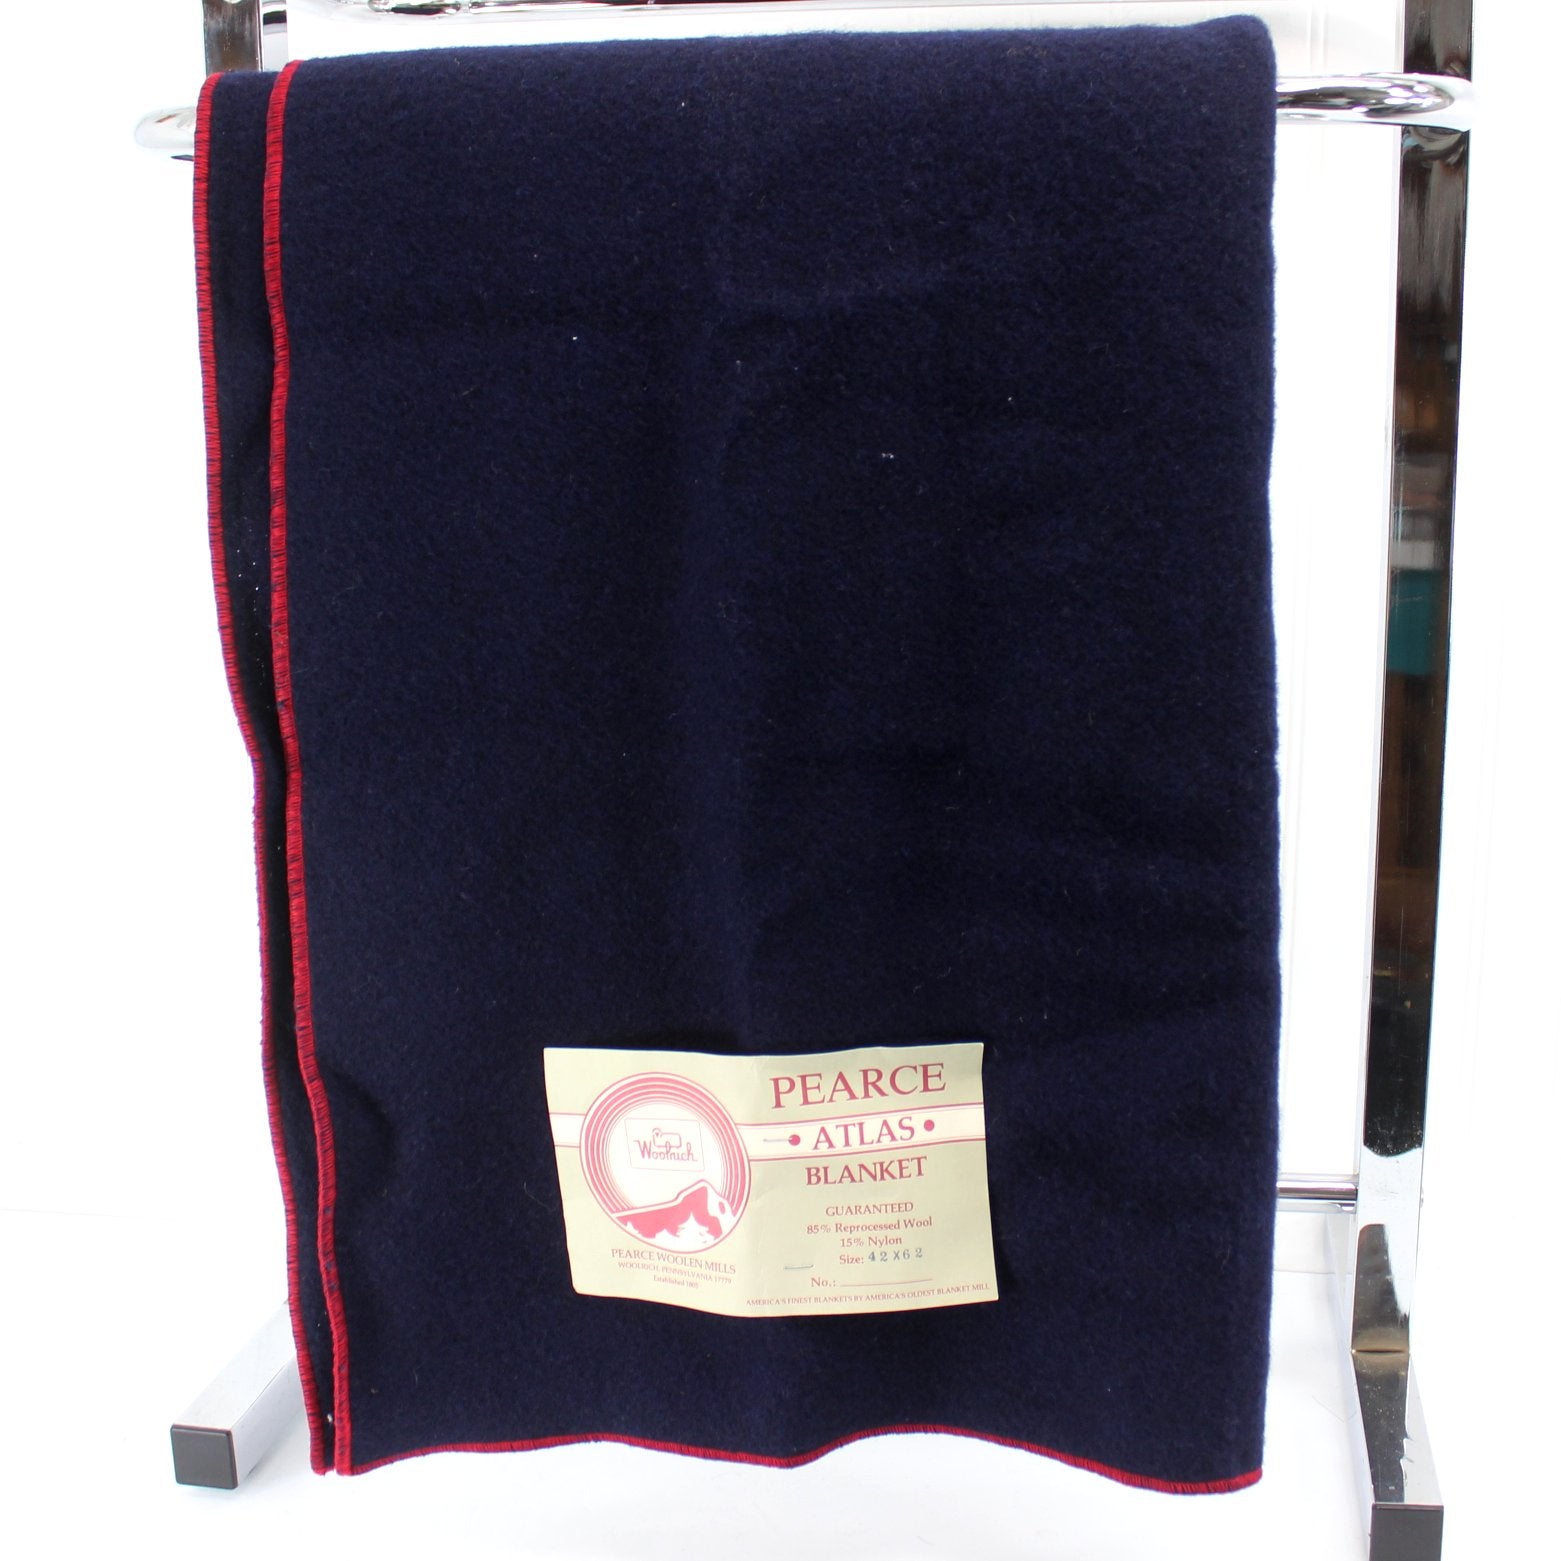 Woolrich Wool Blend Blanket Throw Navy Red Stitch New 40" x 60" camping blanket